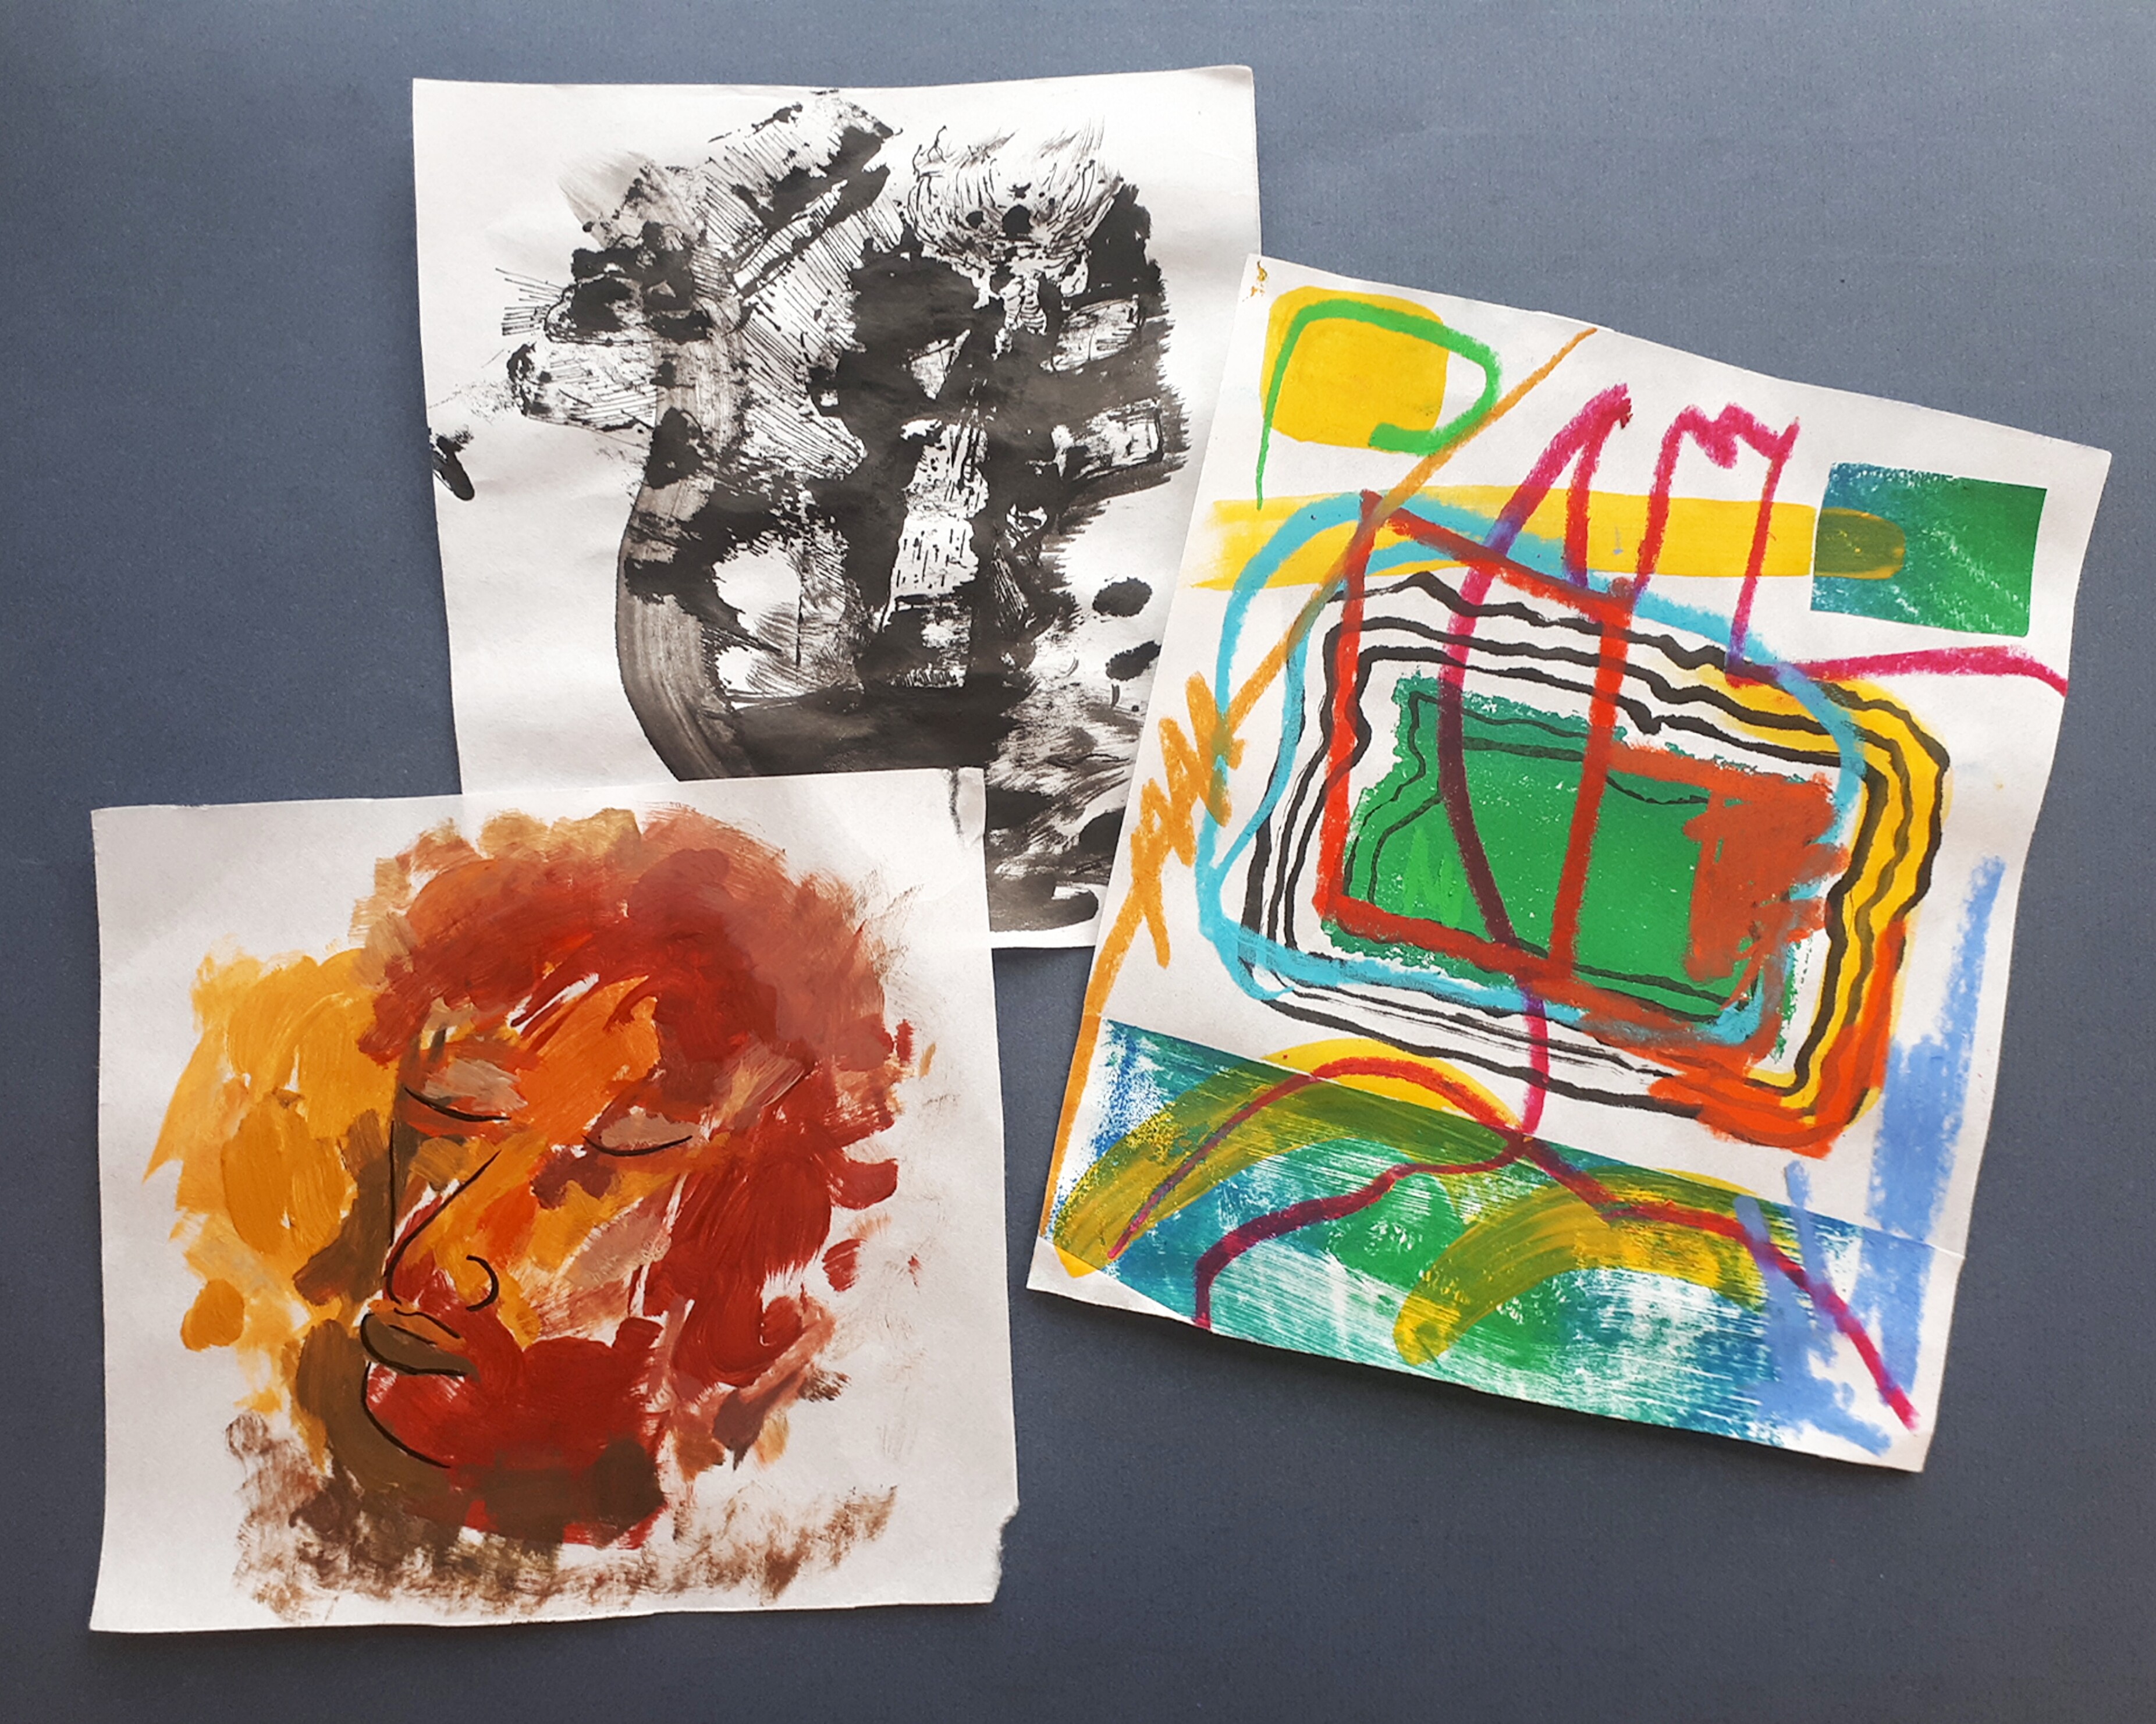 A set of three abstract paintings on paper arranged casually on a dark table surface